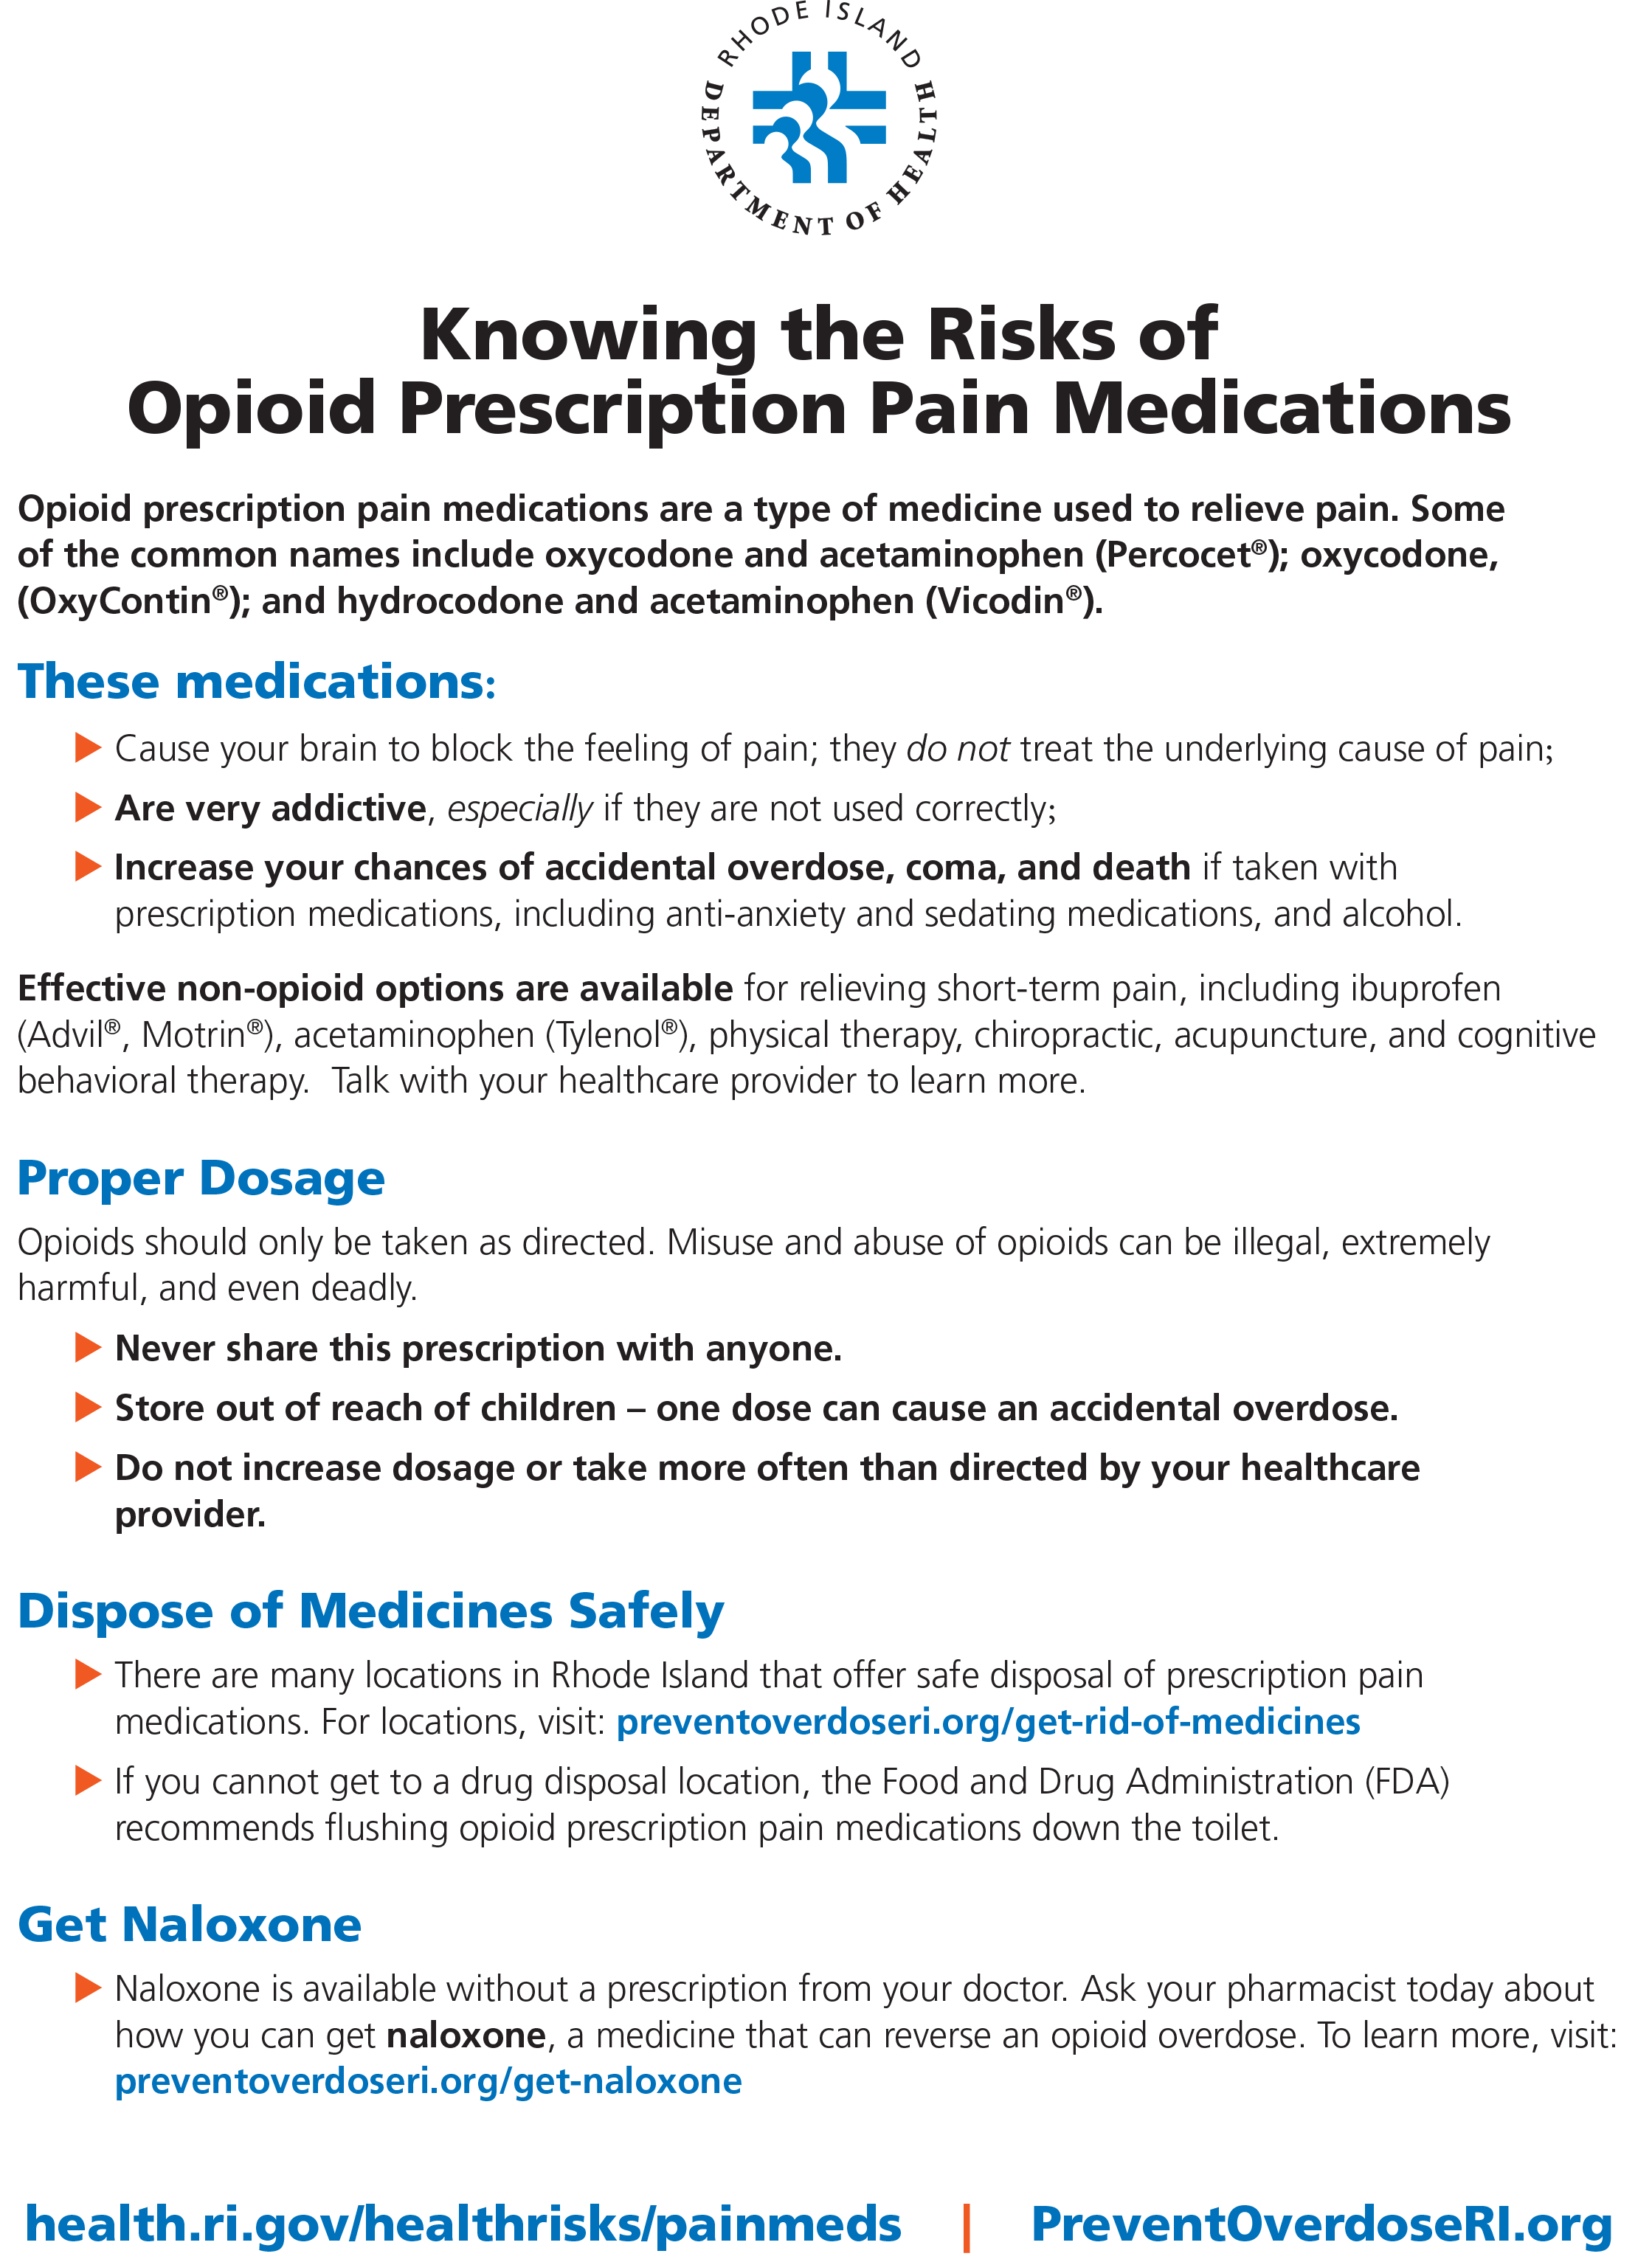 Knowing the Risks of Opioid Prescription Pain Medications 8 1/2 x 11